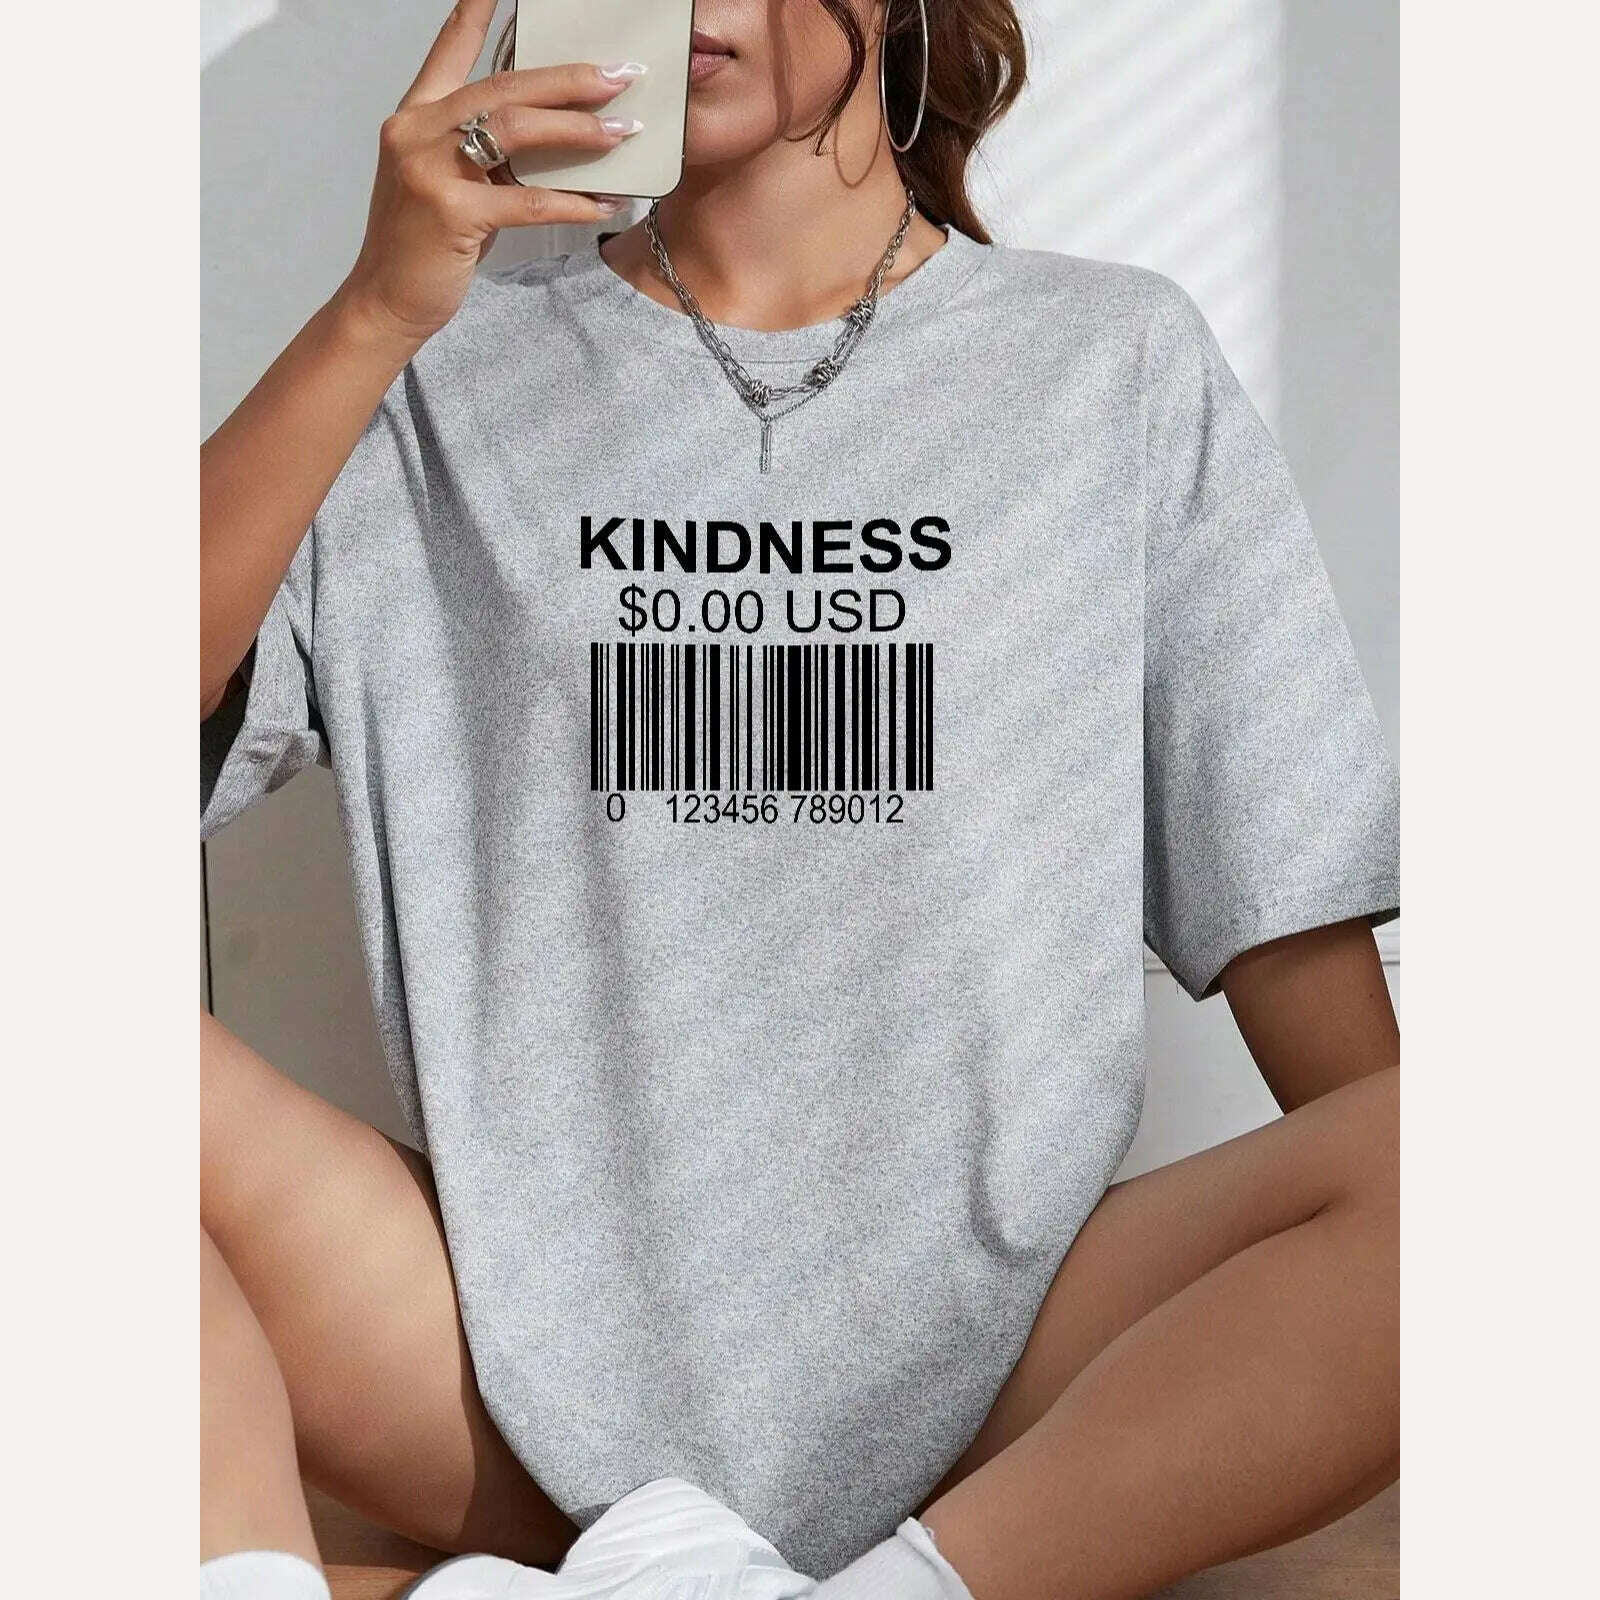 KIMLUD, Kindness Creative Bar Code Creativity Womens Short Sleeve Funny Casual Oversize Tops All-math Trend T-Shirts Woman Tee Clothing, GRAY / M, KIMLUD Womens Clothes